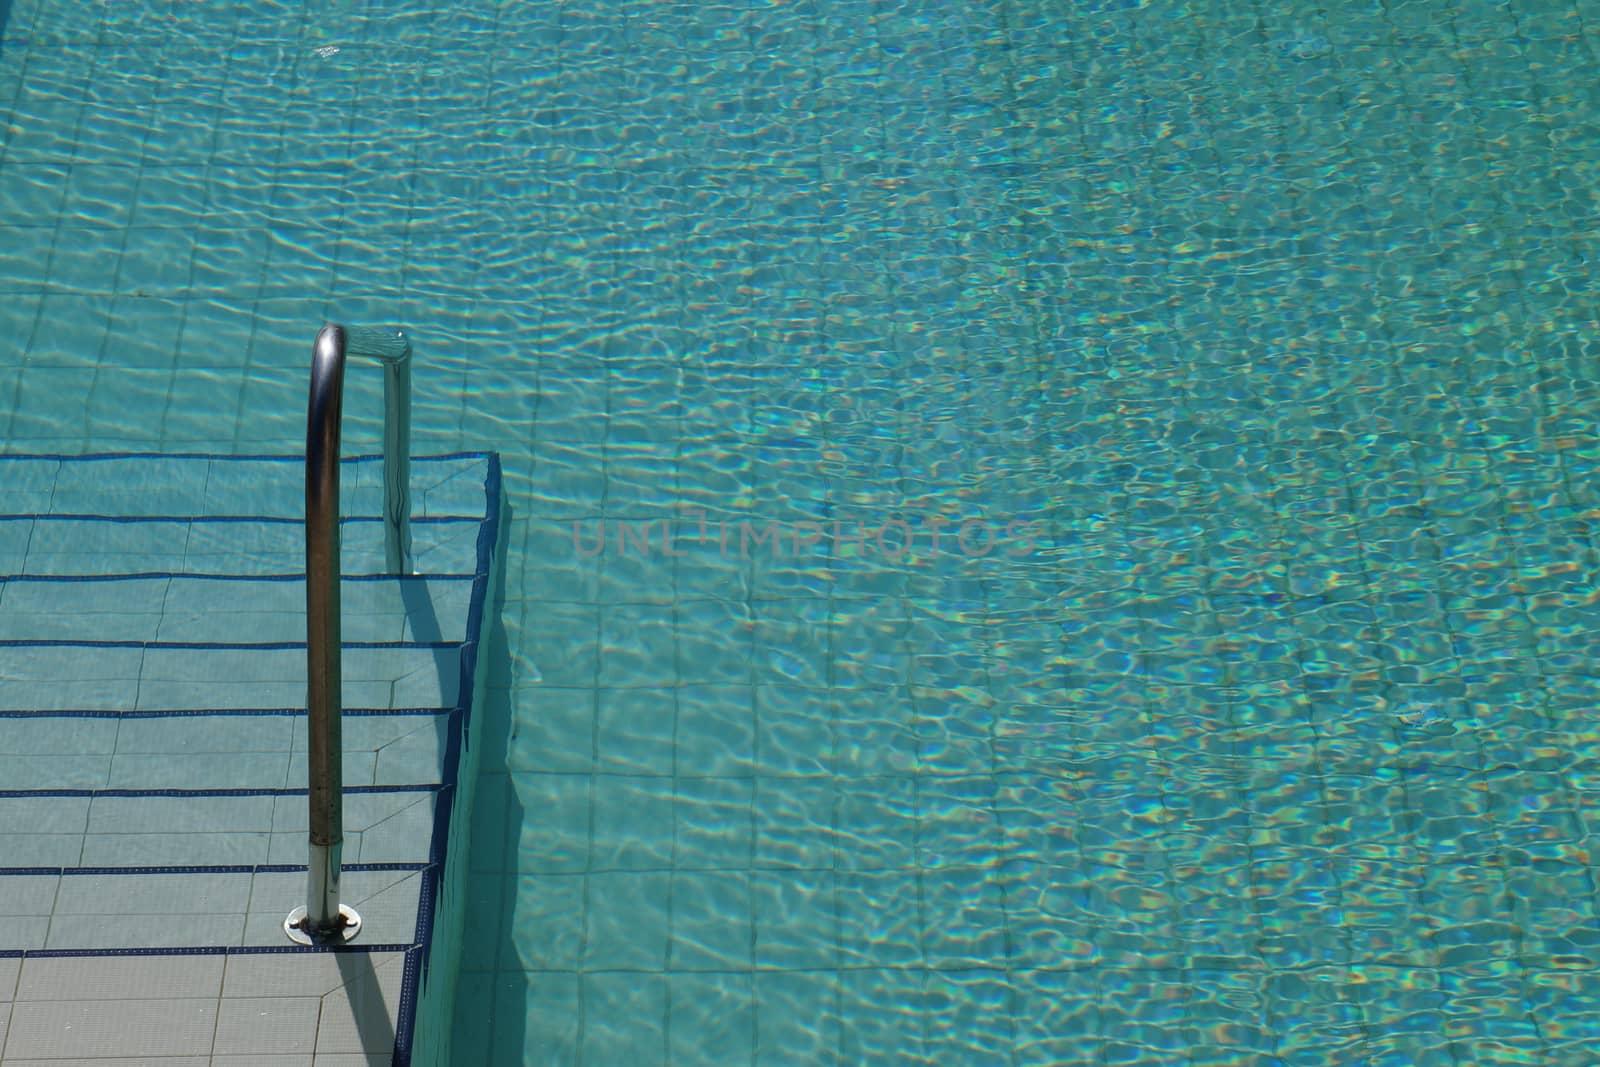 fragment of the pool with a ladder close up by Annado